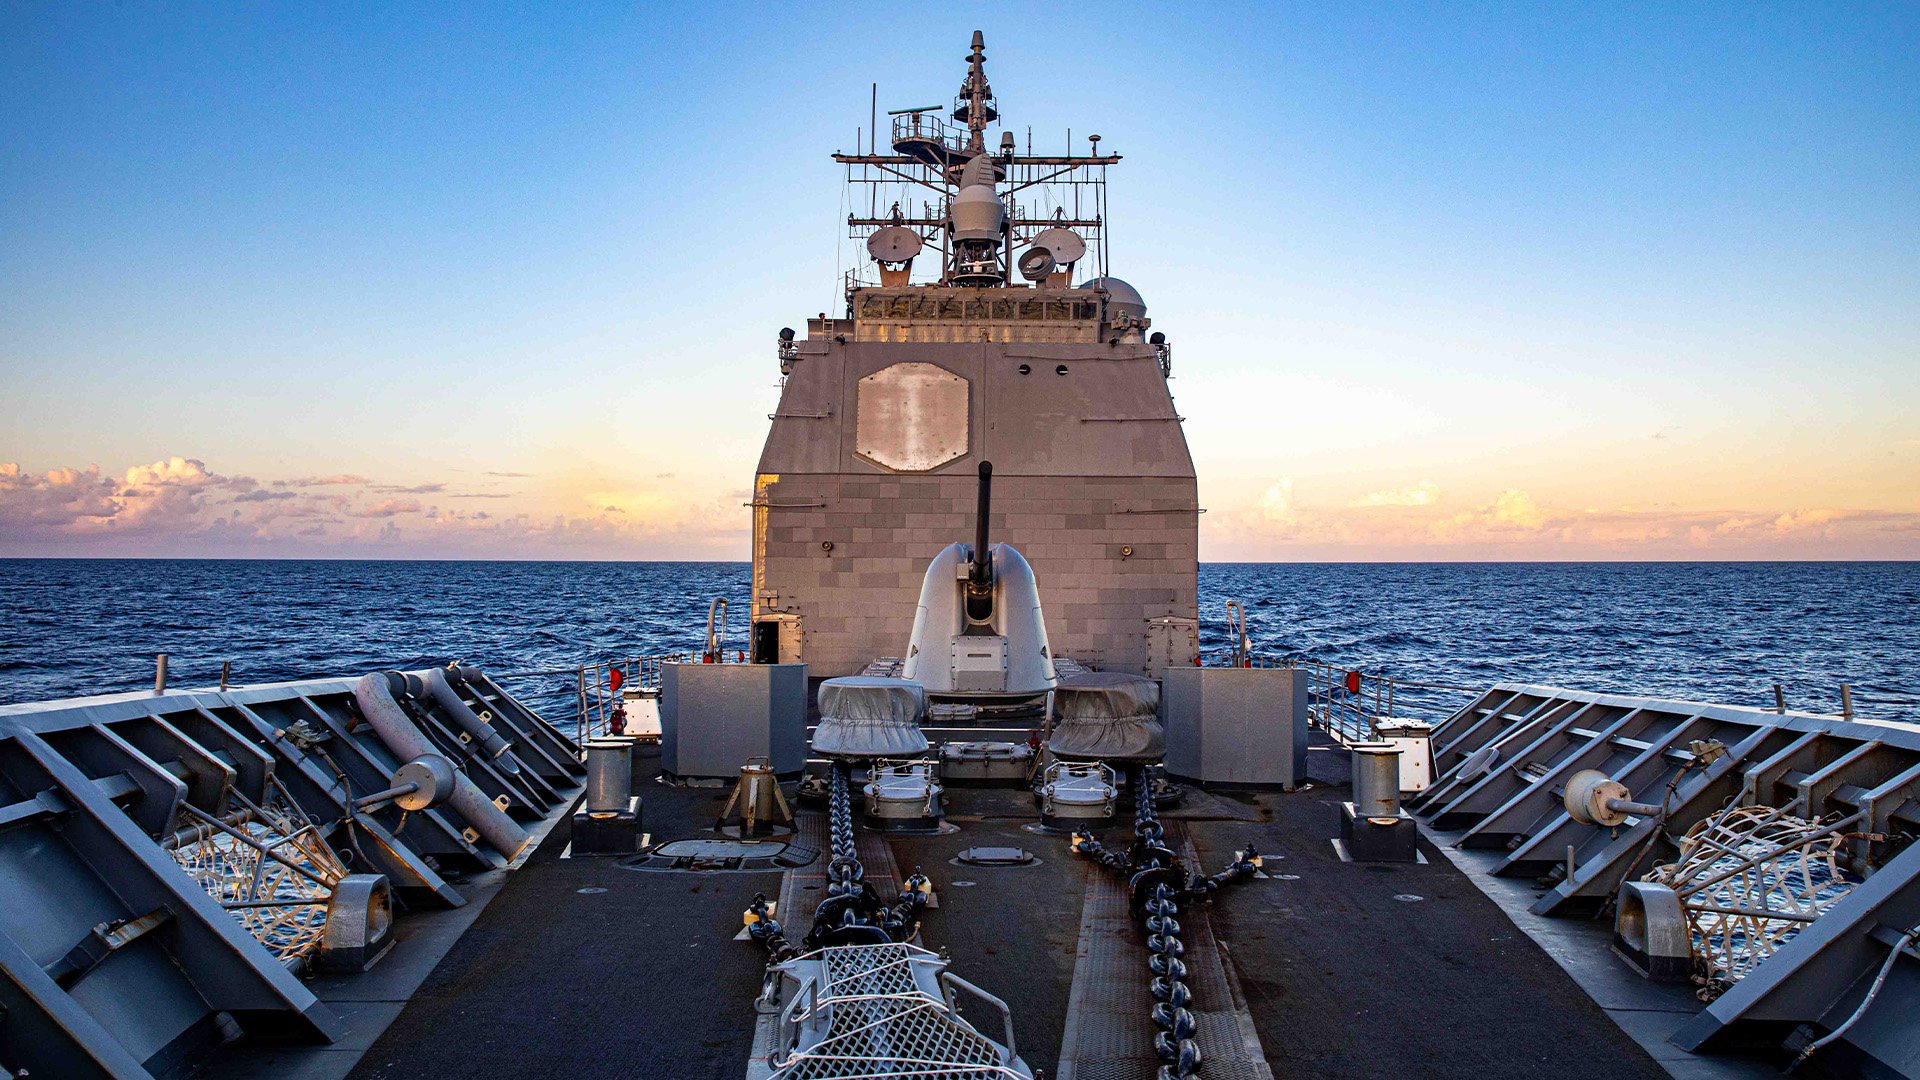 The Ticonderoga-class guided-missile cruiser Chancellorsville (CG 62) sails the South China Sea on Nov. 29, 2022. Chancellorsville irked China by performing a freedom on navigation operation near contested cays in the Spratly Islands. US Navy photo by Mass Communication Specialist 2nd Class Justin Stack.